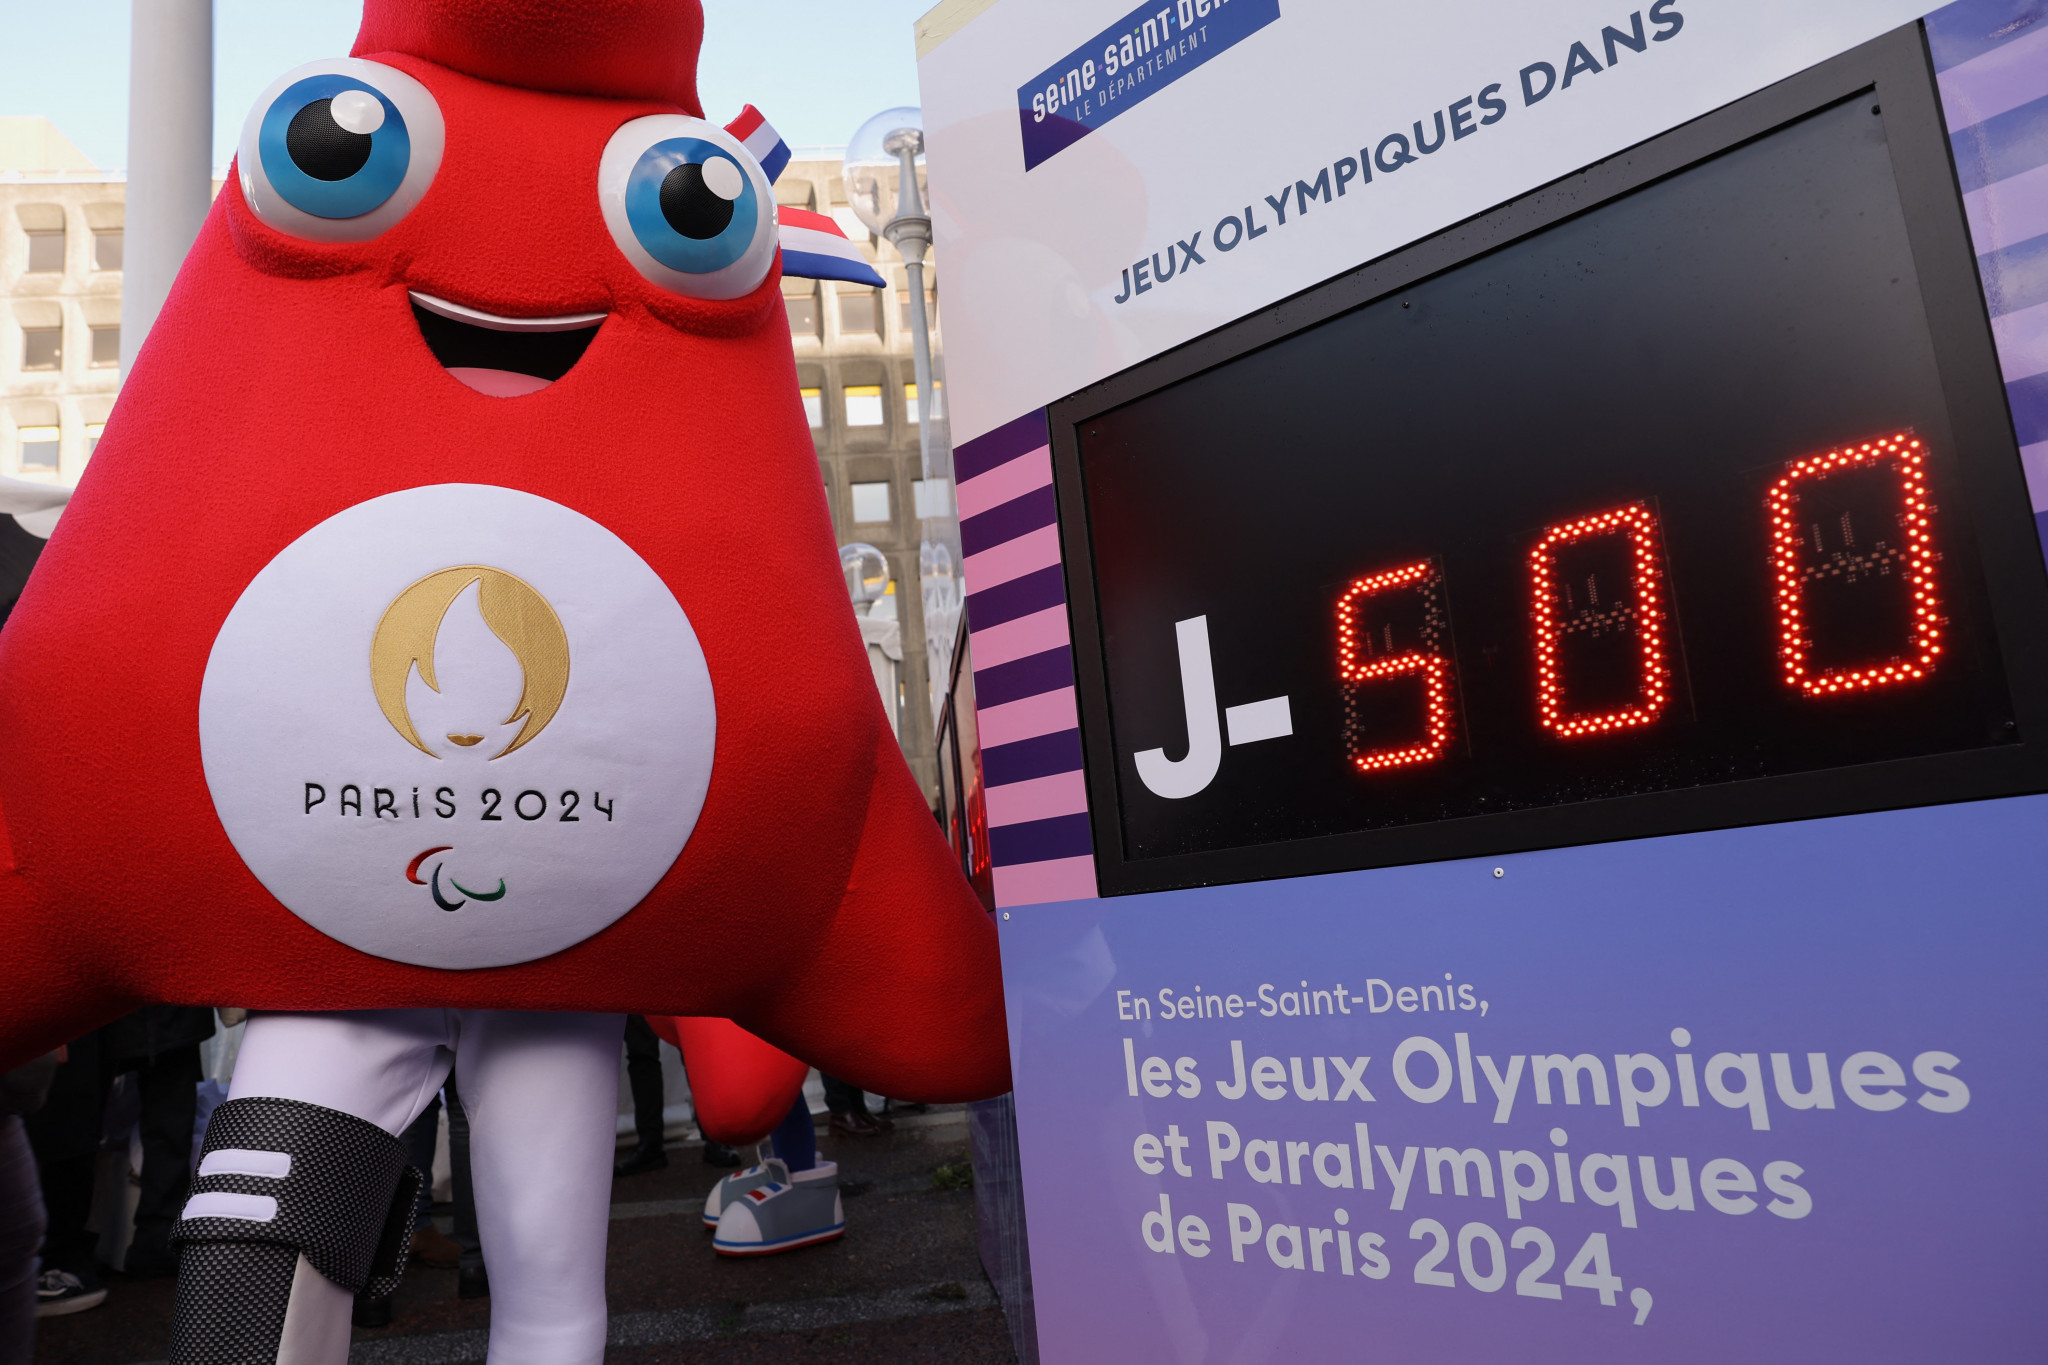 Paris has marked 500 days to the Opening of the Olympics with a global relay ©Getty Images